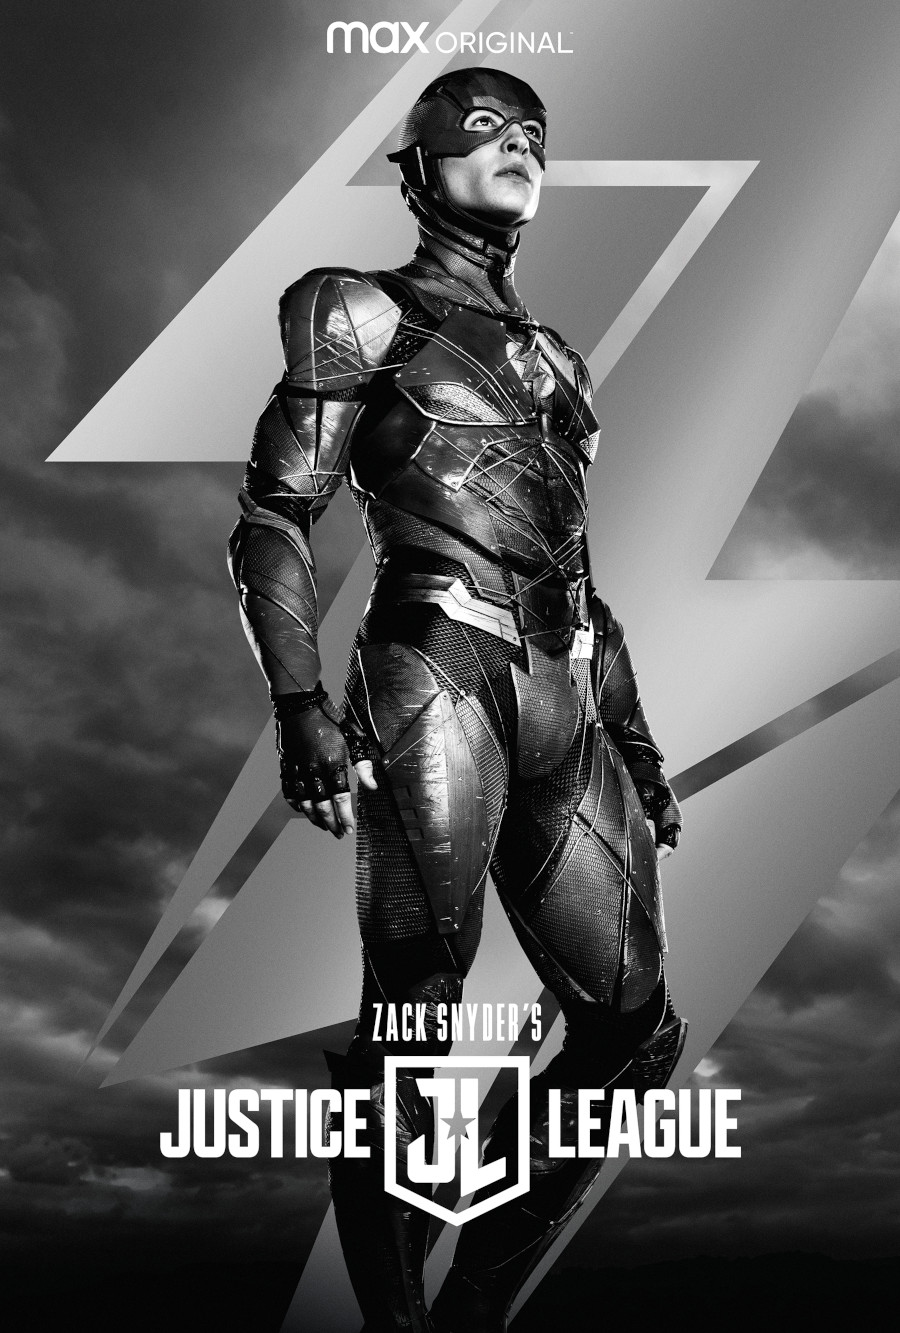 The Flash Ezra Miller Zack Snyder Justice League Poster